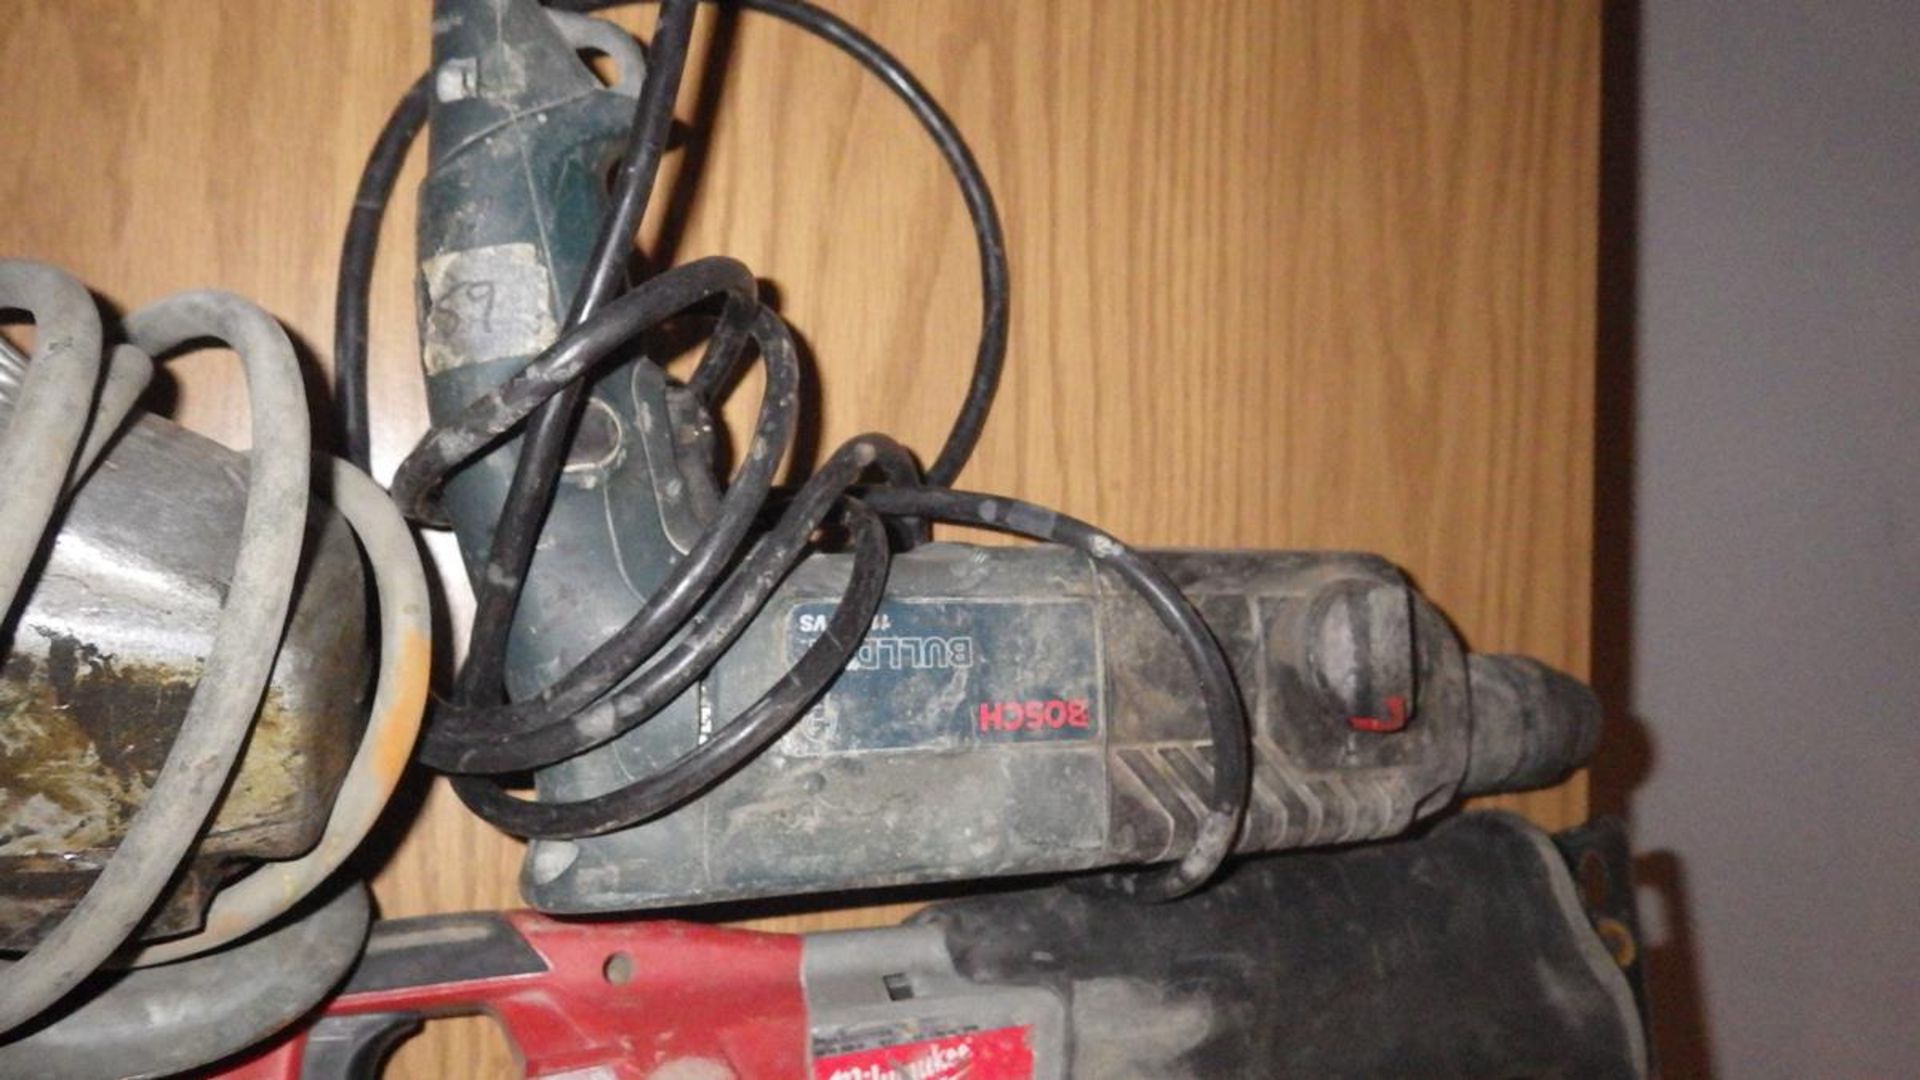 Two Milwaukee reciprocating saws one bosch hammer drill and one angle grinder - Image 5 of 5